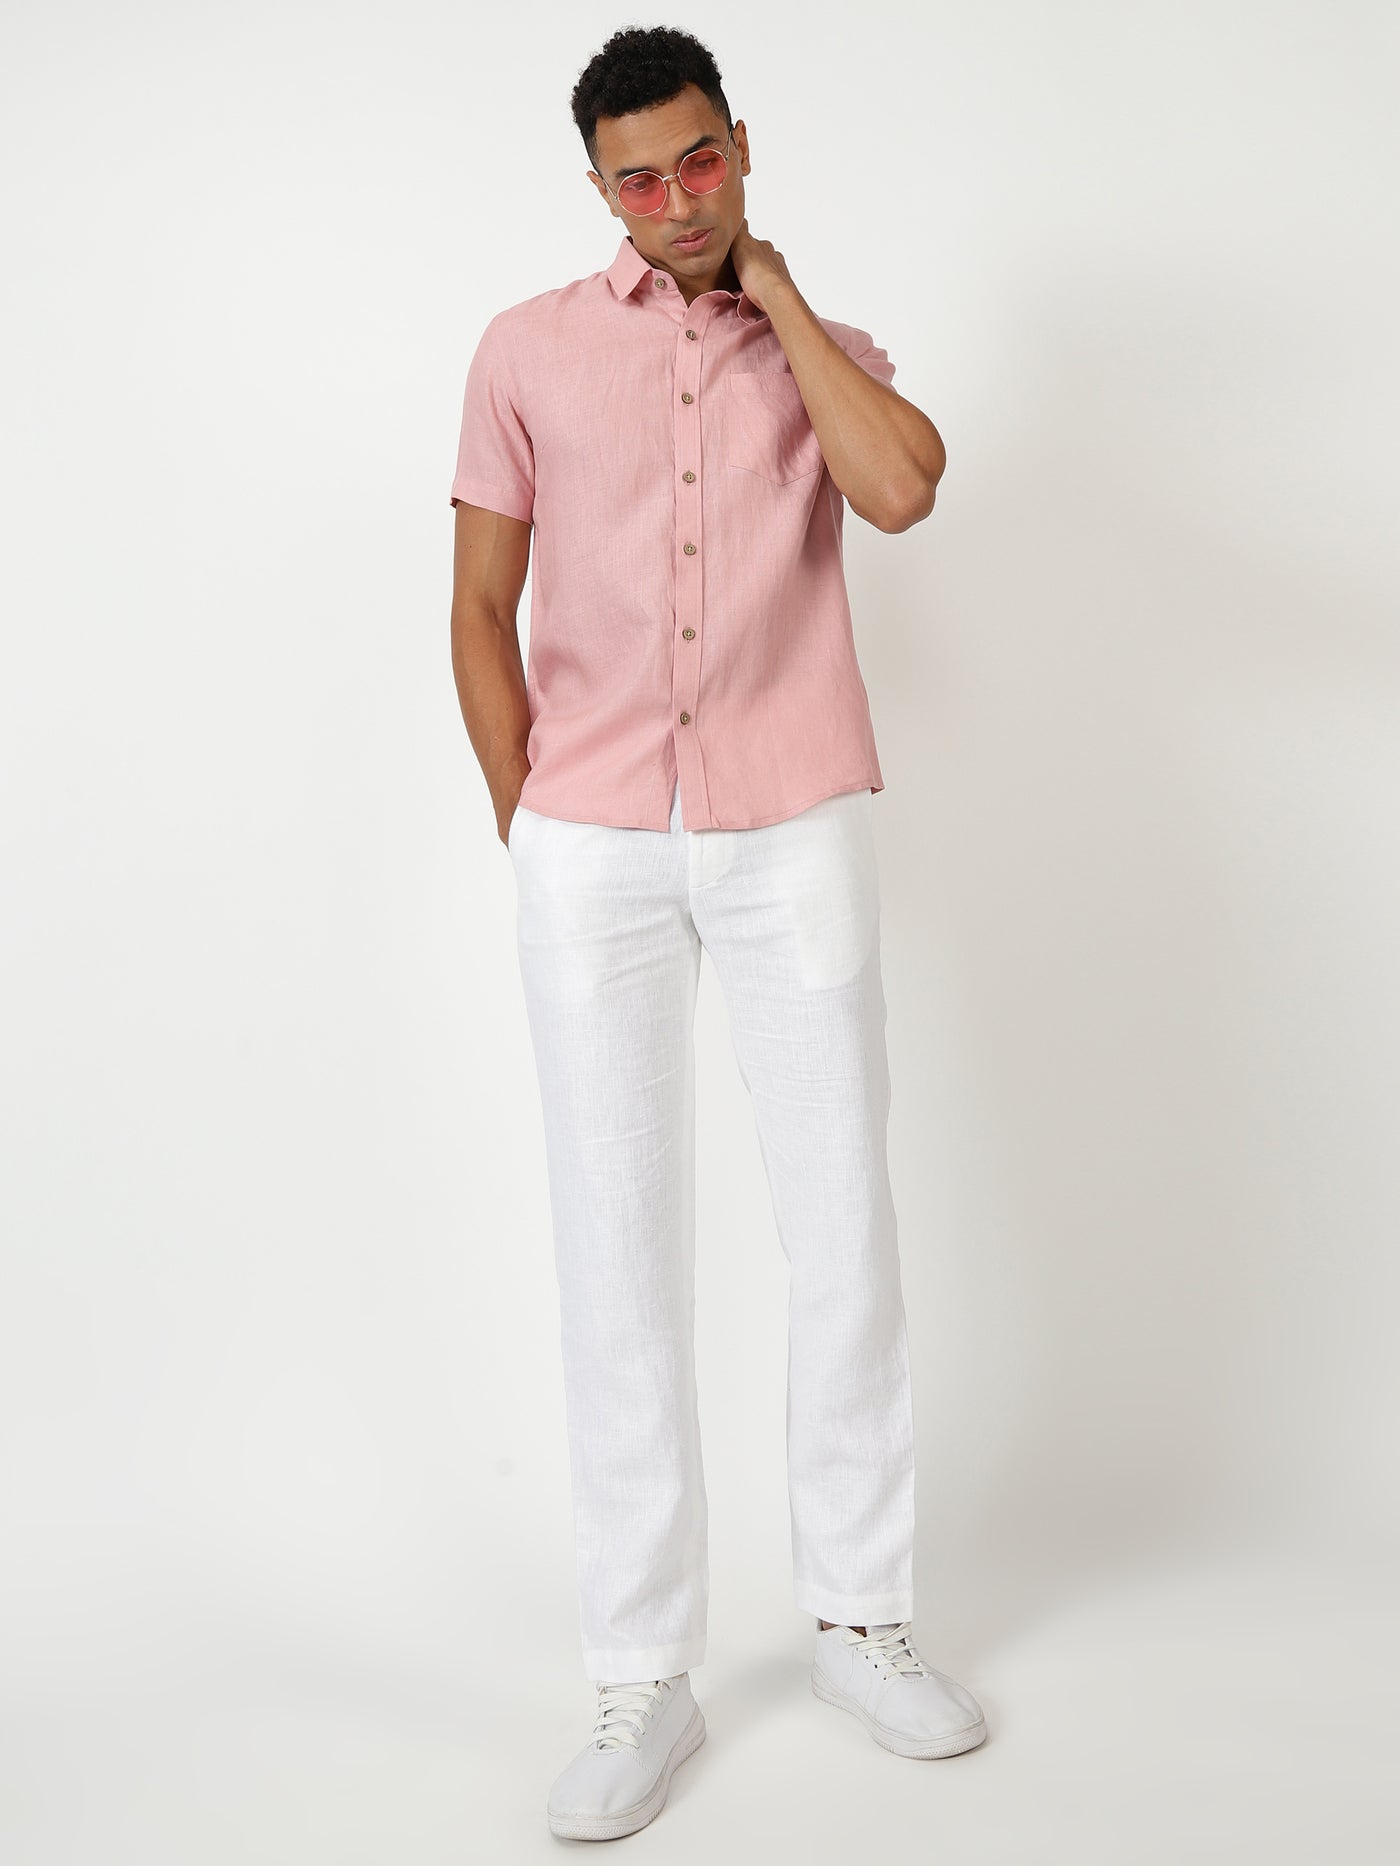 Coral Bliss Look | Salmon Pink Harvey Linen Shirt & Pure White Trousers